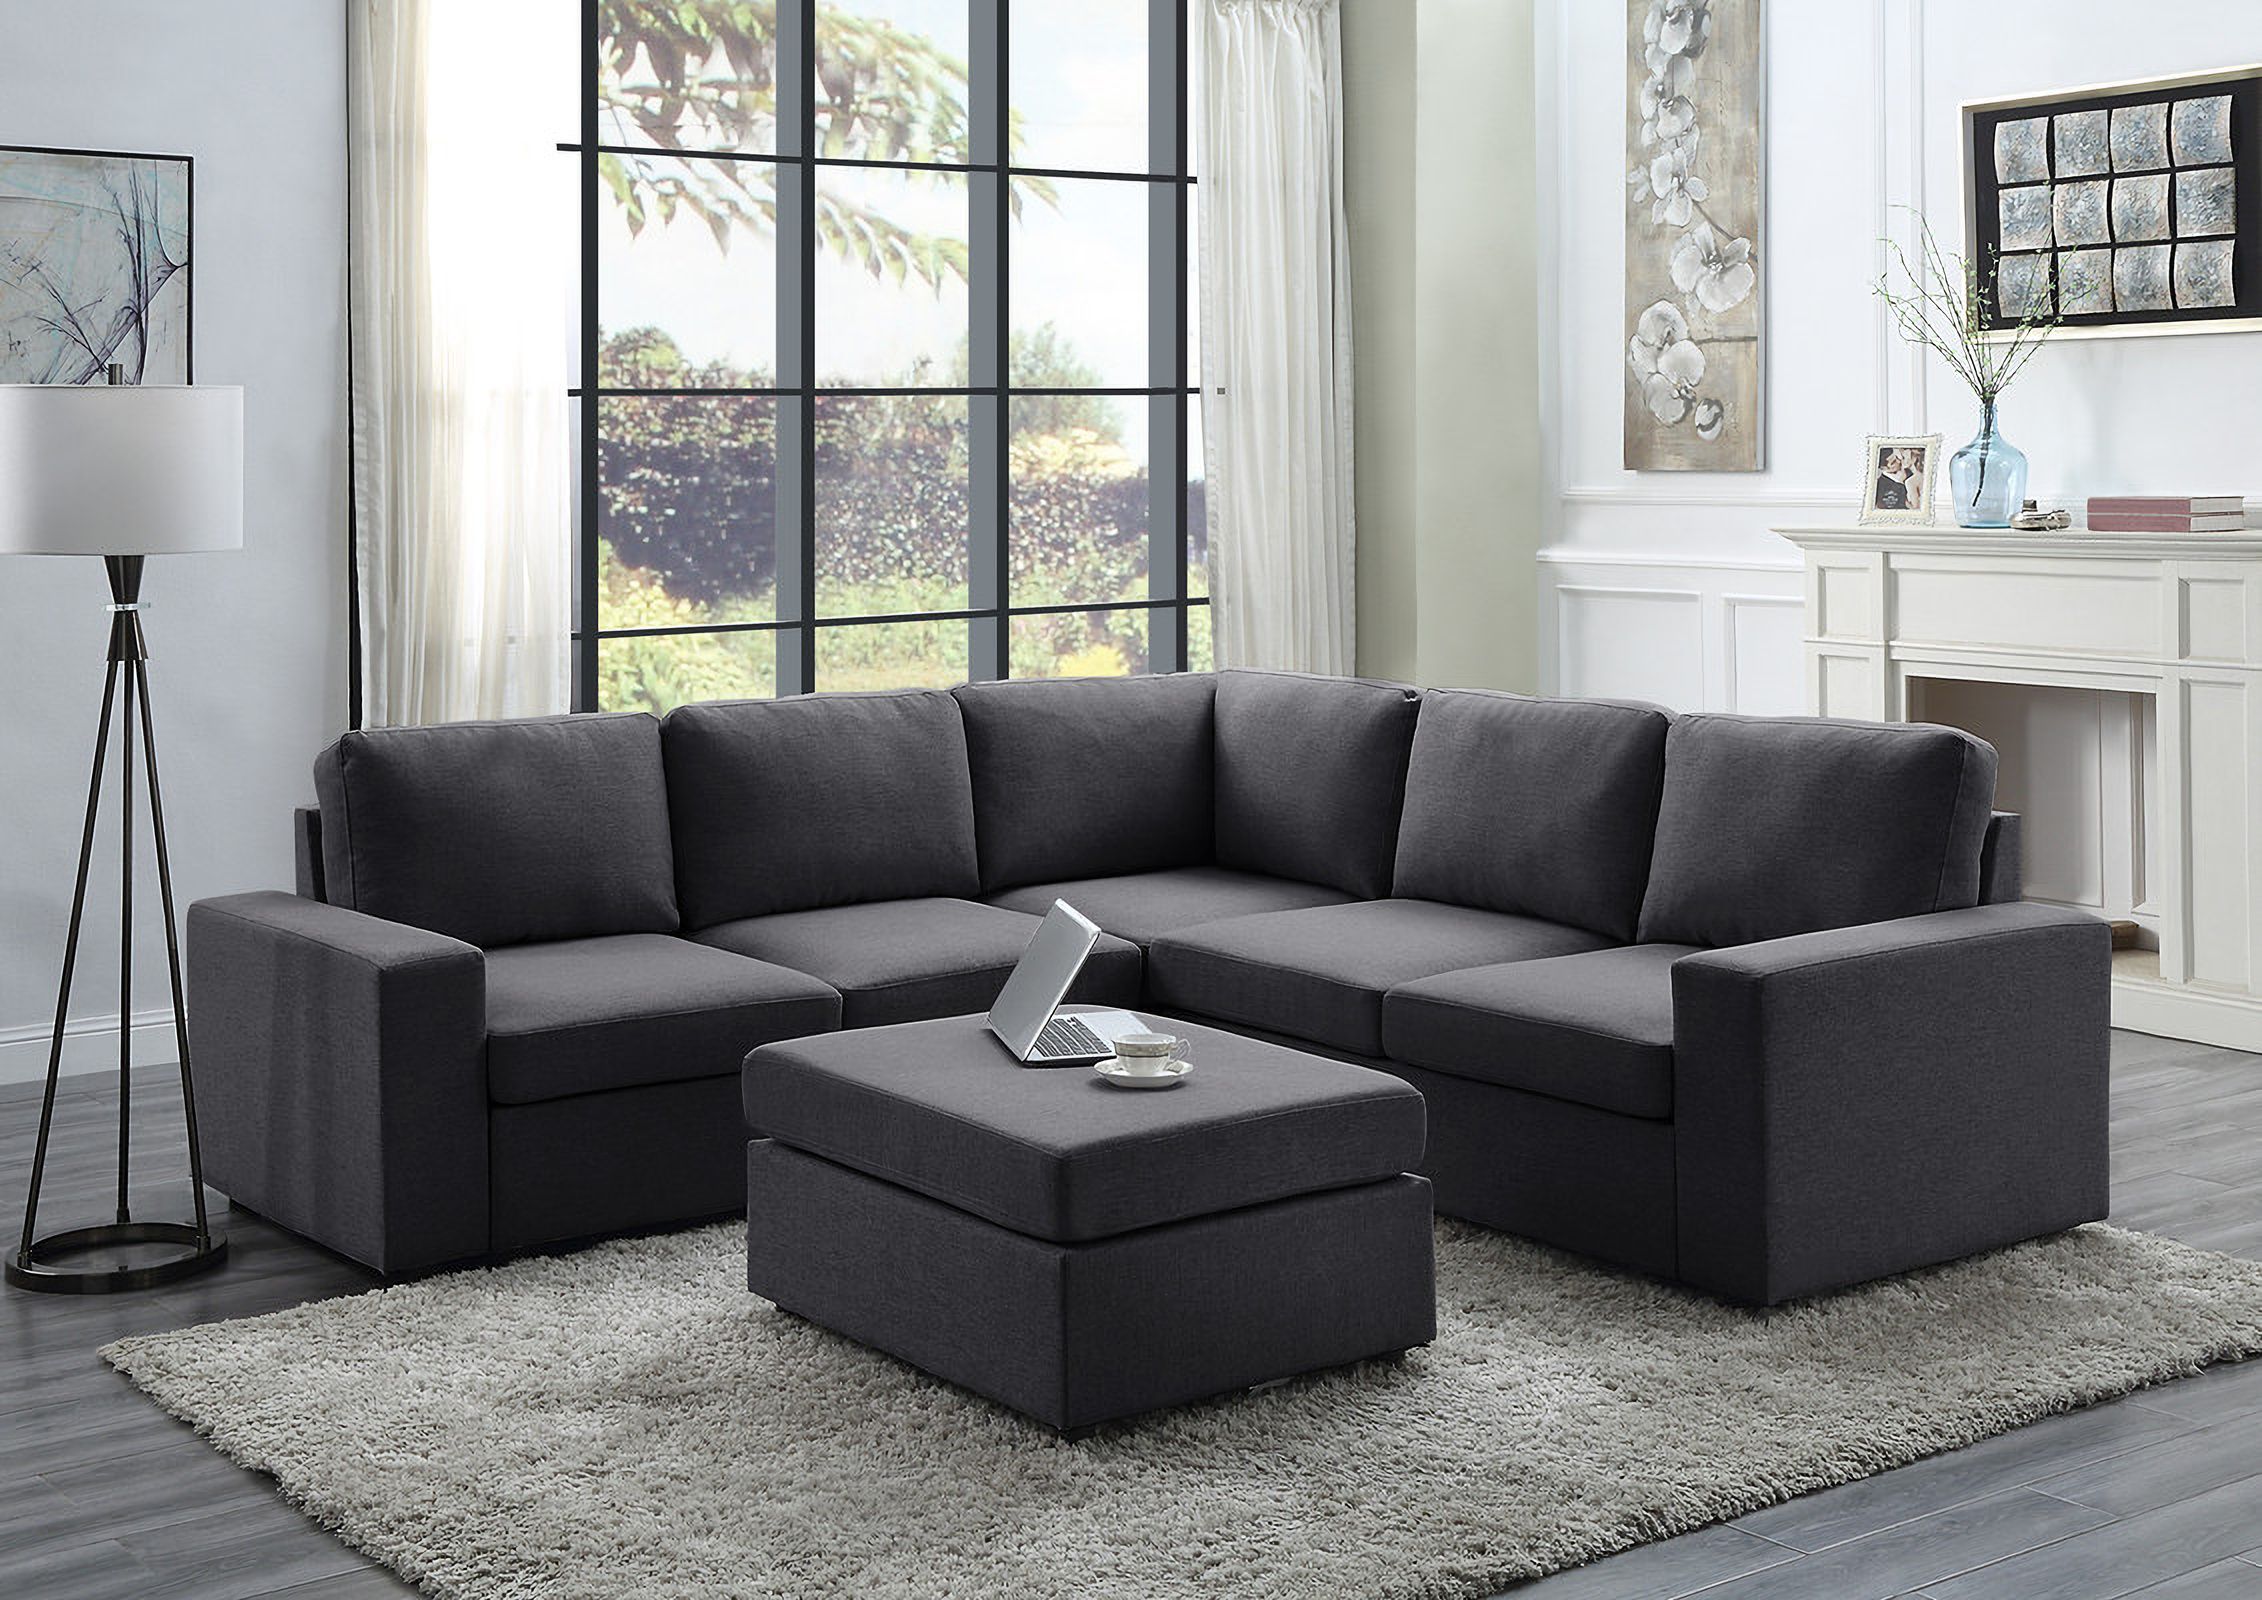 Decker Sectional Sofa With Ottoman In Dark Gray Linenlilola Home |  1stopbedrooms Throughout Dark Gray Sectional Sofas (View 7 of 15)